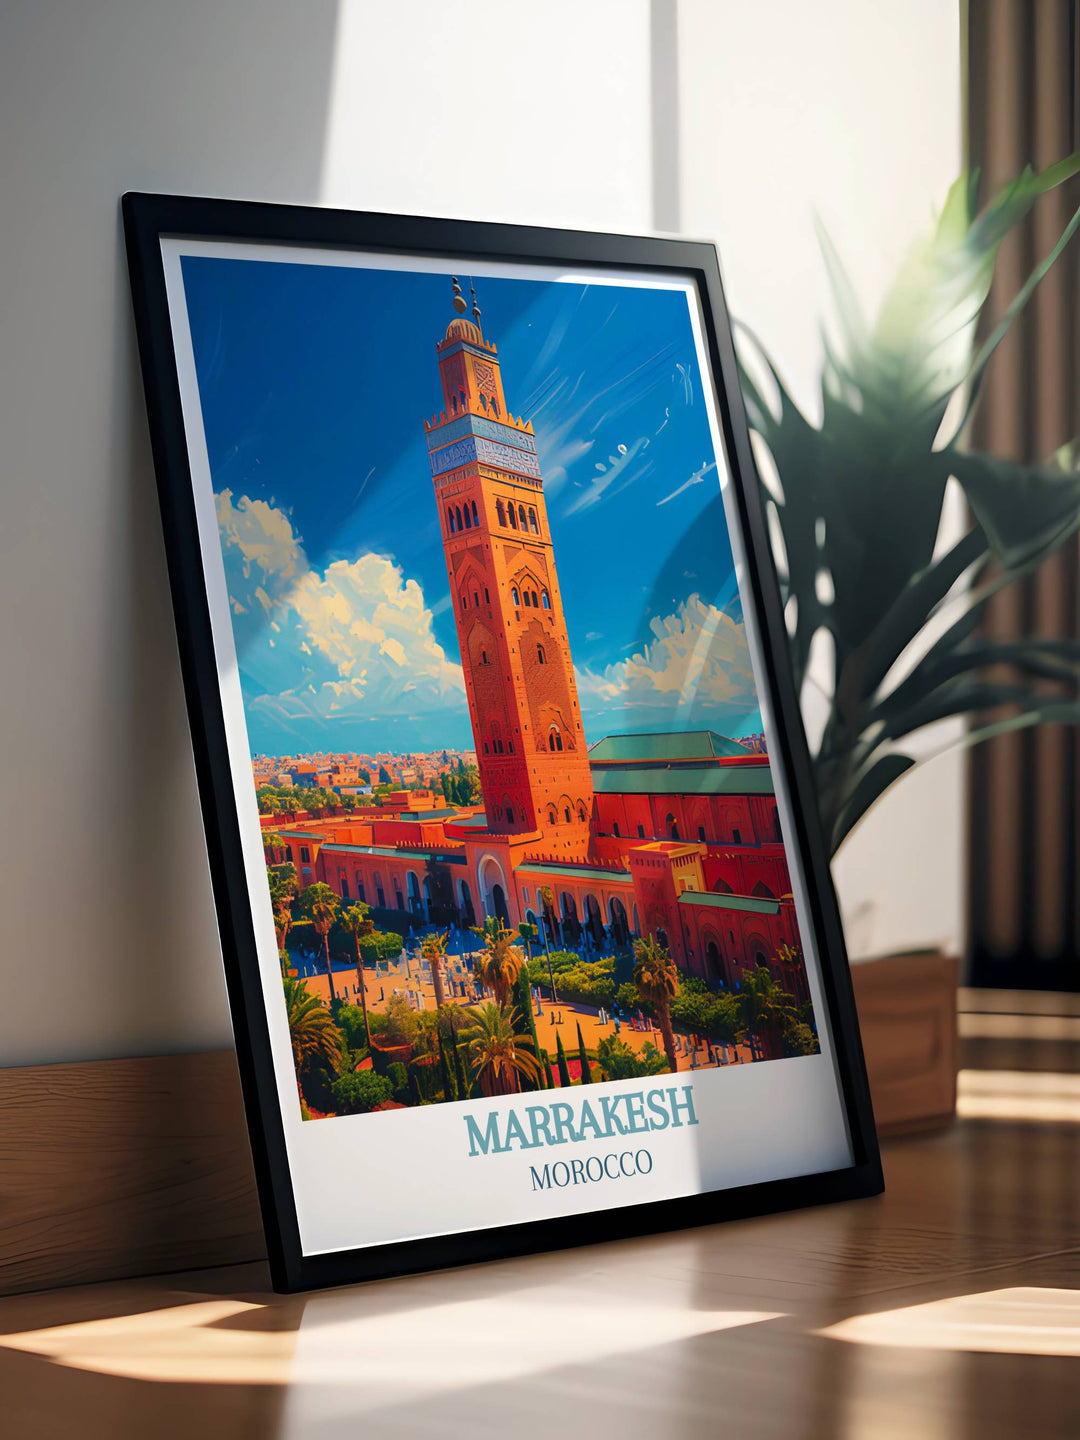 Marrakesh framed art capturing an evening scene with warm lights and bustling local activity.